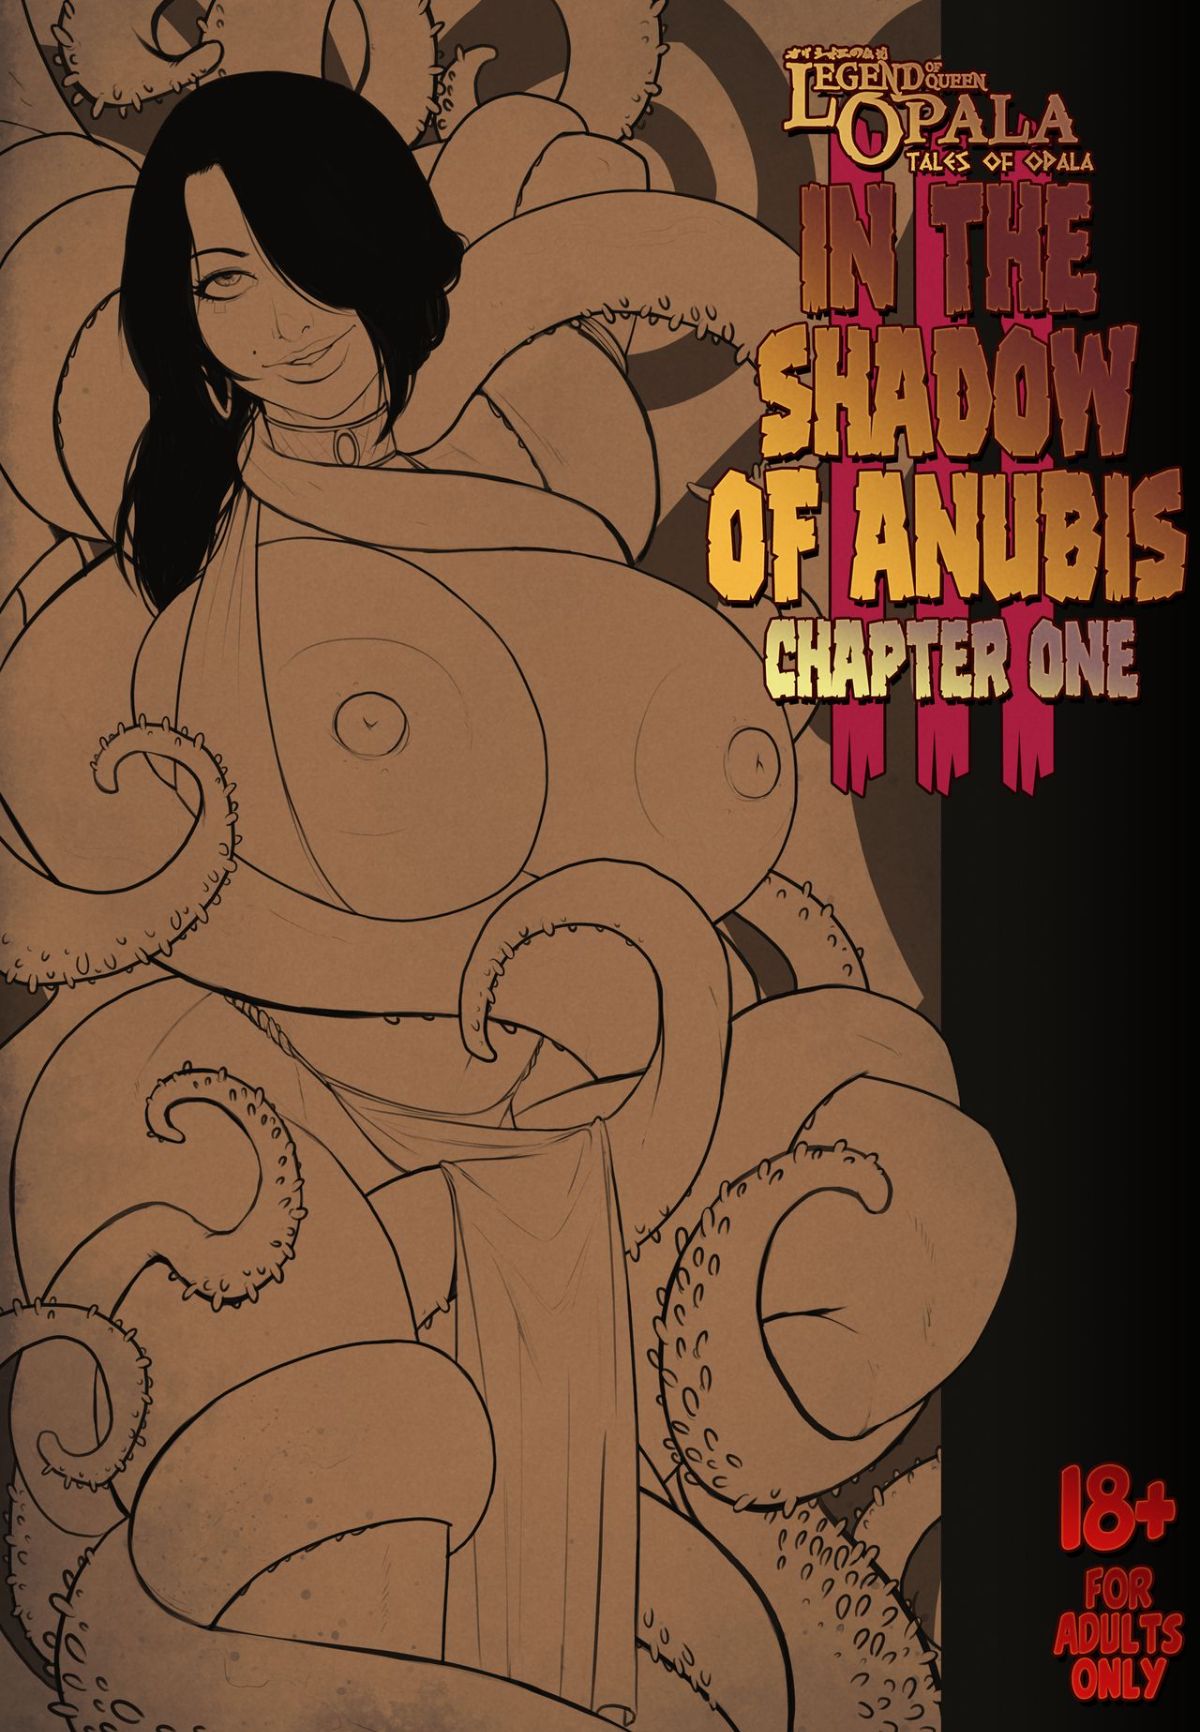 In the Shadow of Anubis 3 Ch 1 Hentai english 01